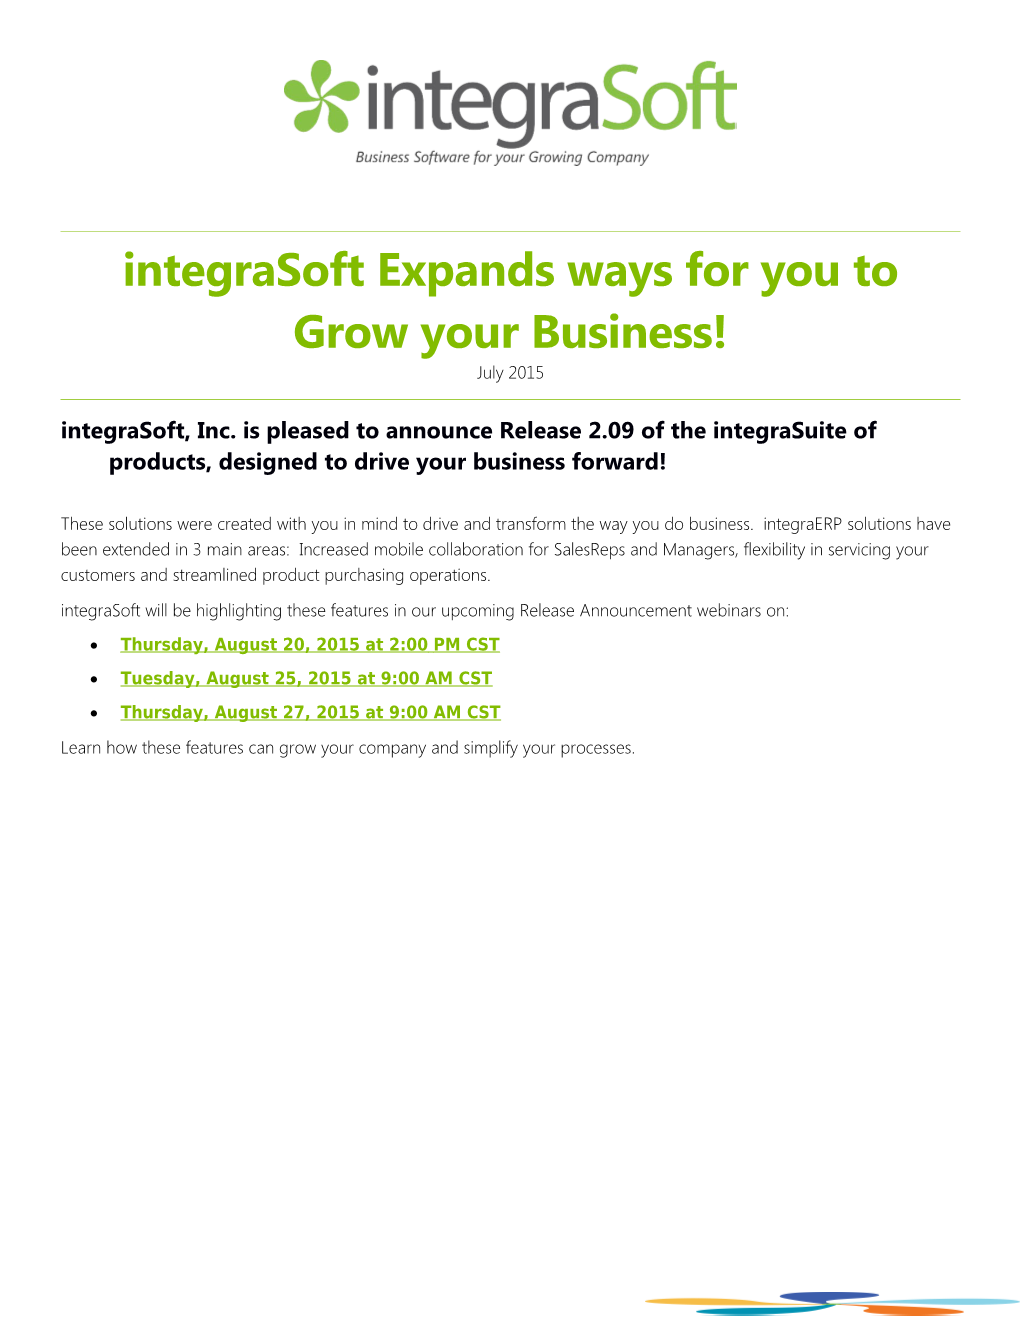 Integrasoft Expands Ways for You to Grow Your Business!